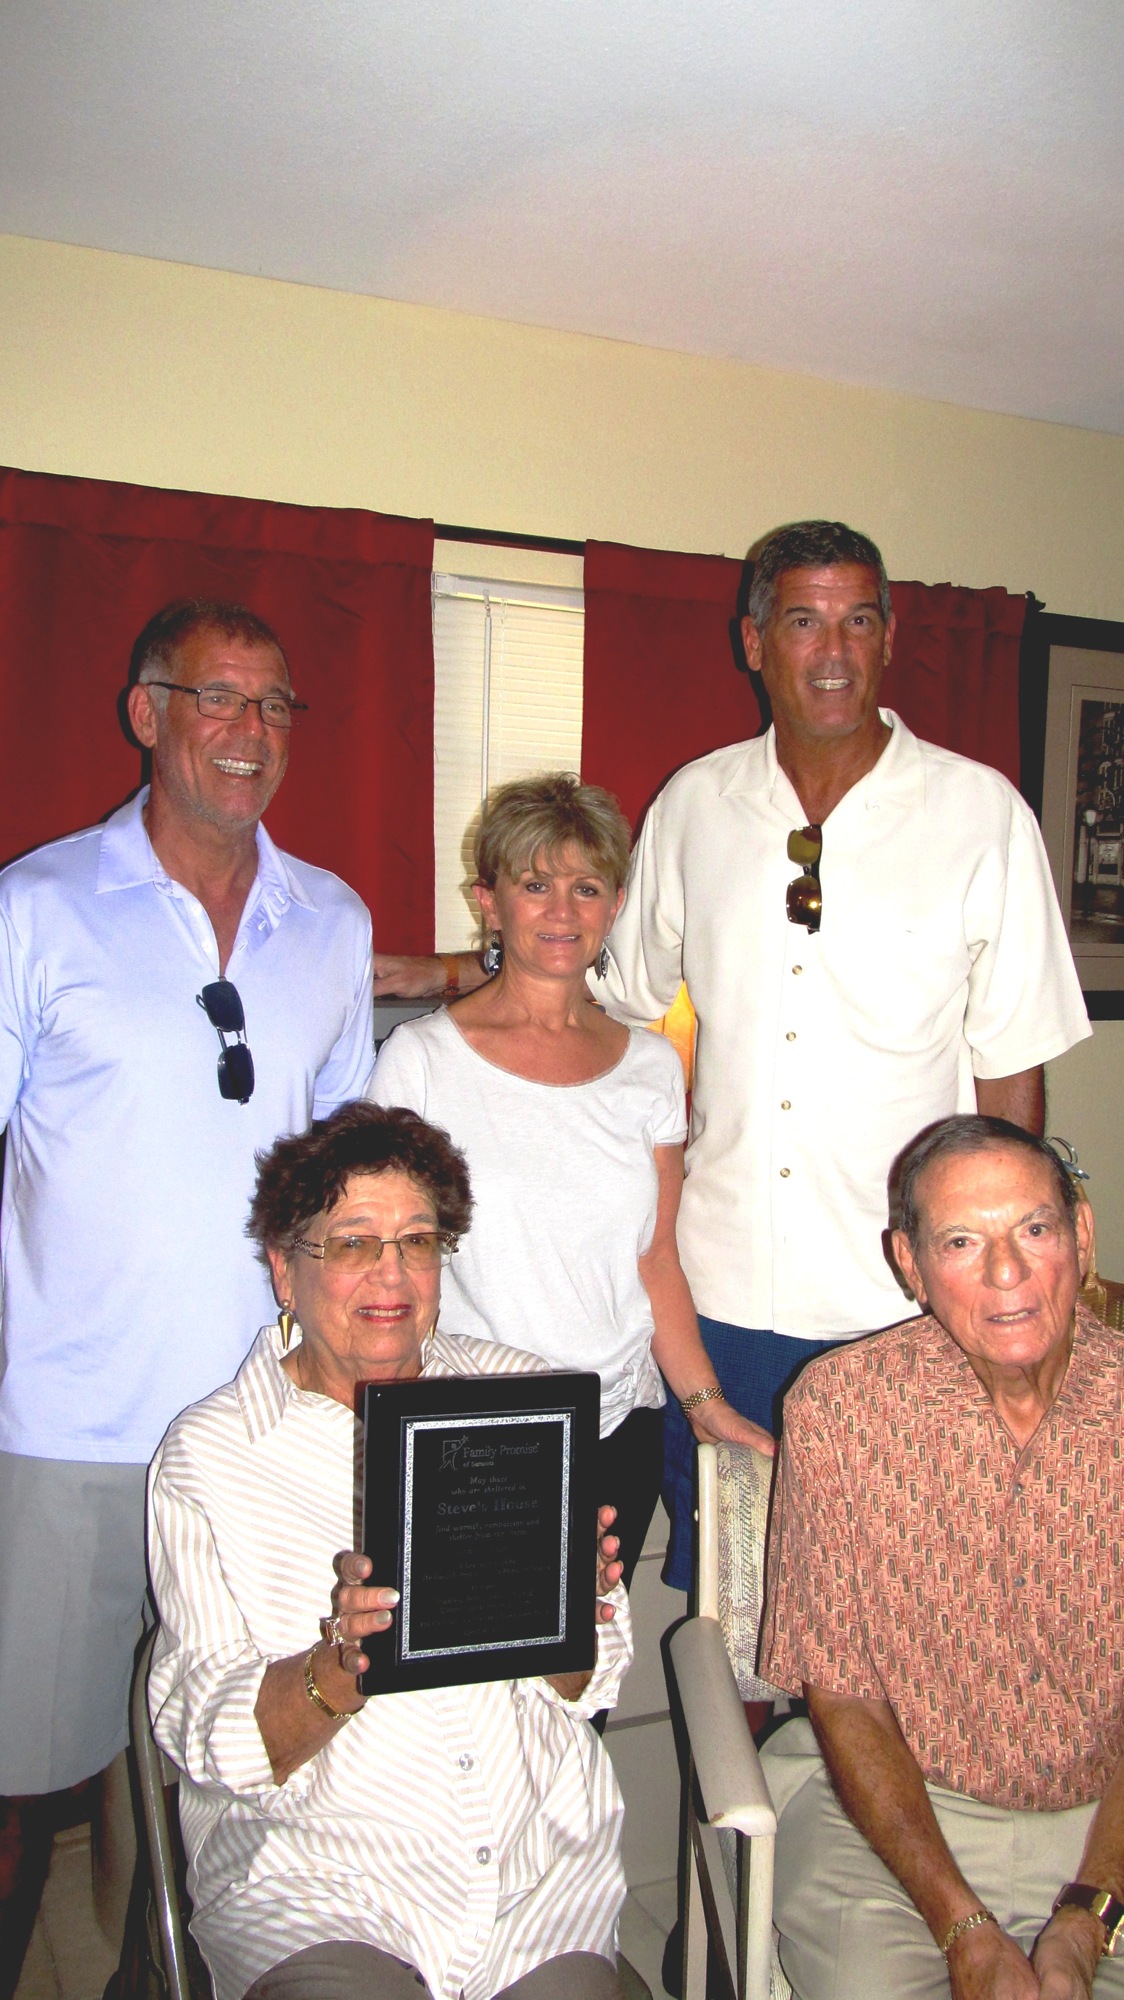 The Pelletz family: Betty and Stanley Pelletz with their children, Marc Pelletz and Carmen and David Pelletz, received a plaque in April to remember the late Steve Pelletz.